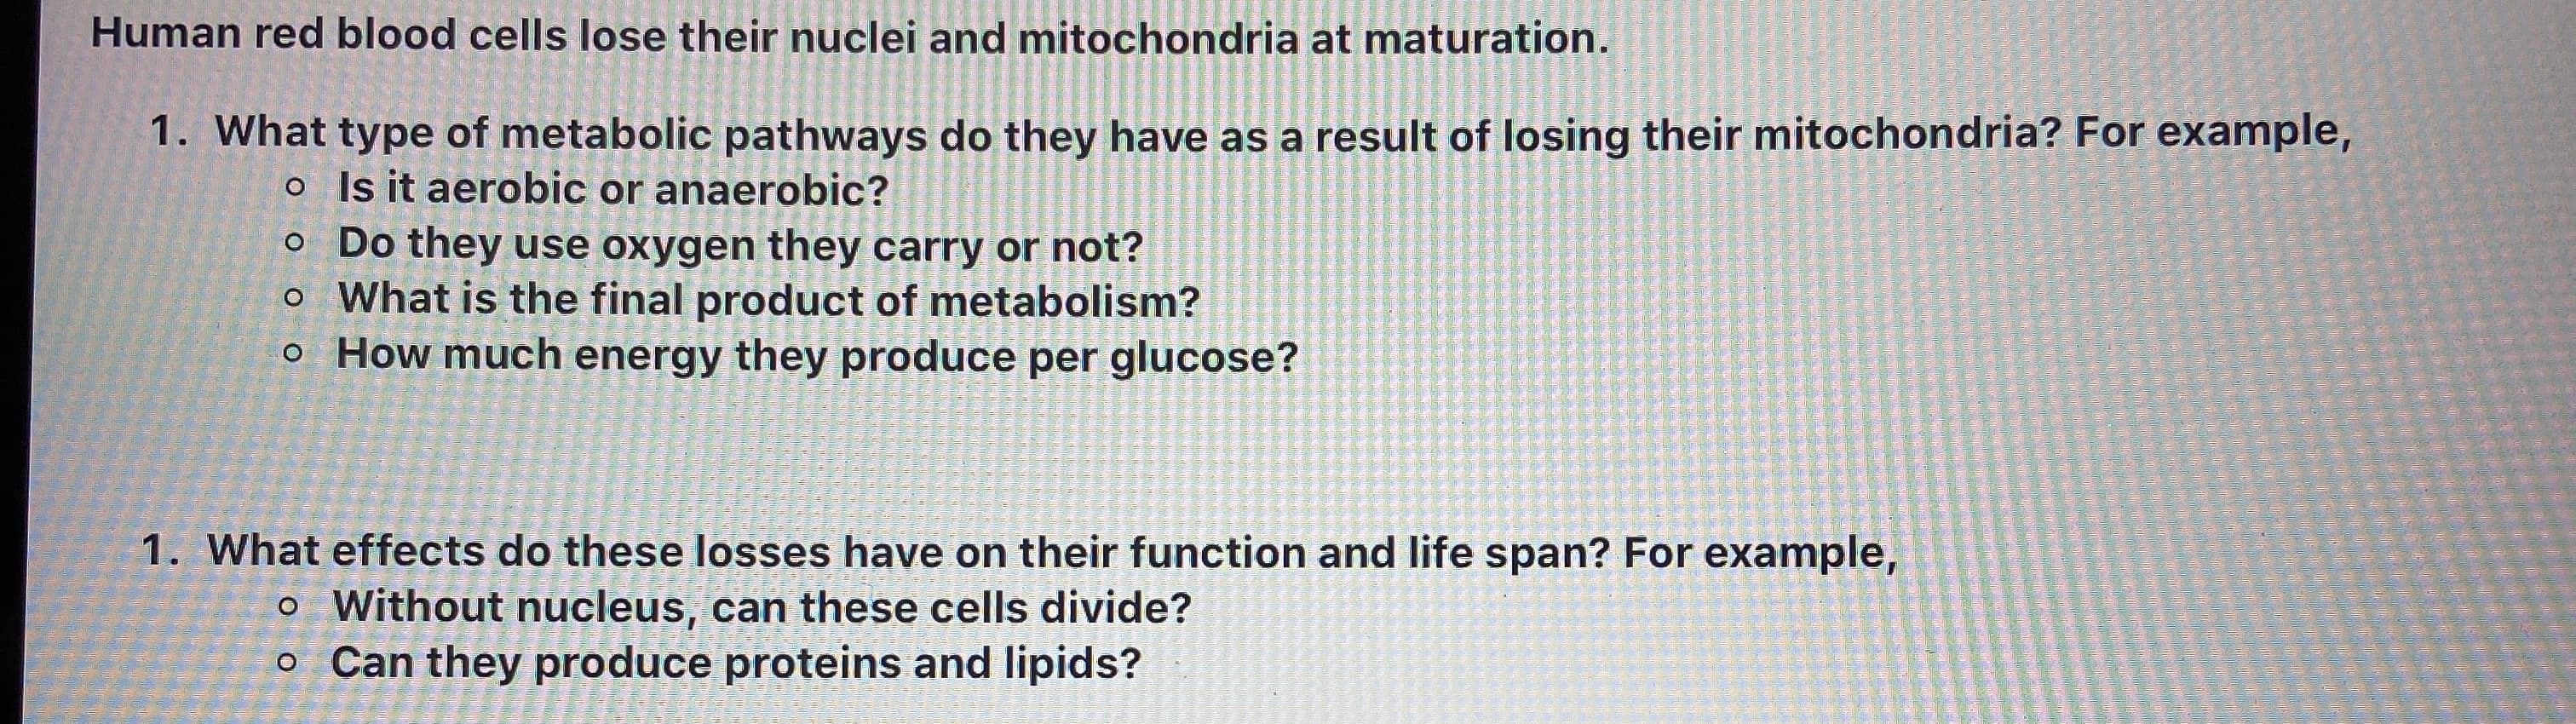 1. What type of metabolic pathways do they have as a result of losing their mitochondria? For example,
o Is it aerobic or anaerobic?
o Do they use oxygen they carry or not?
o What is the final product of metabolism?
